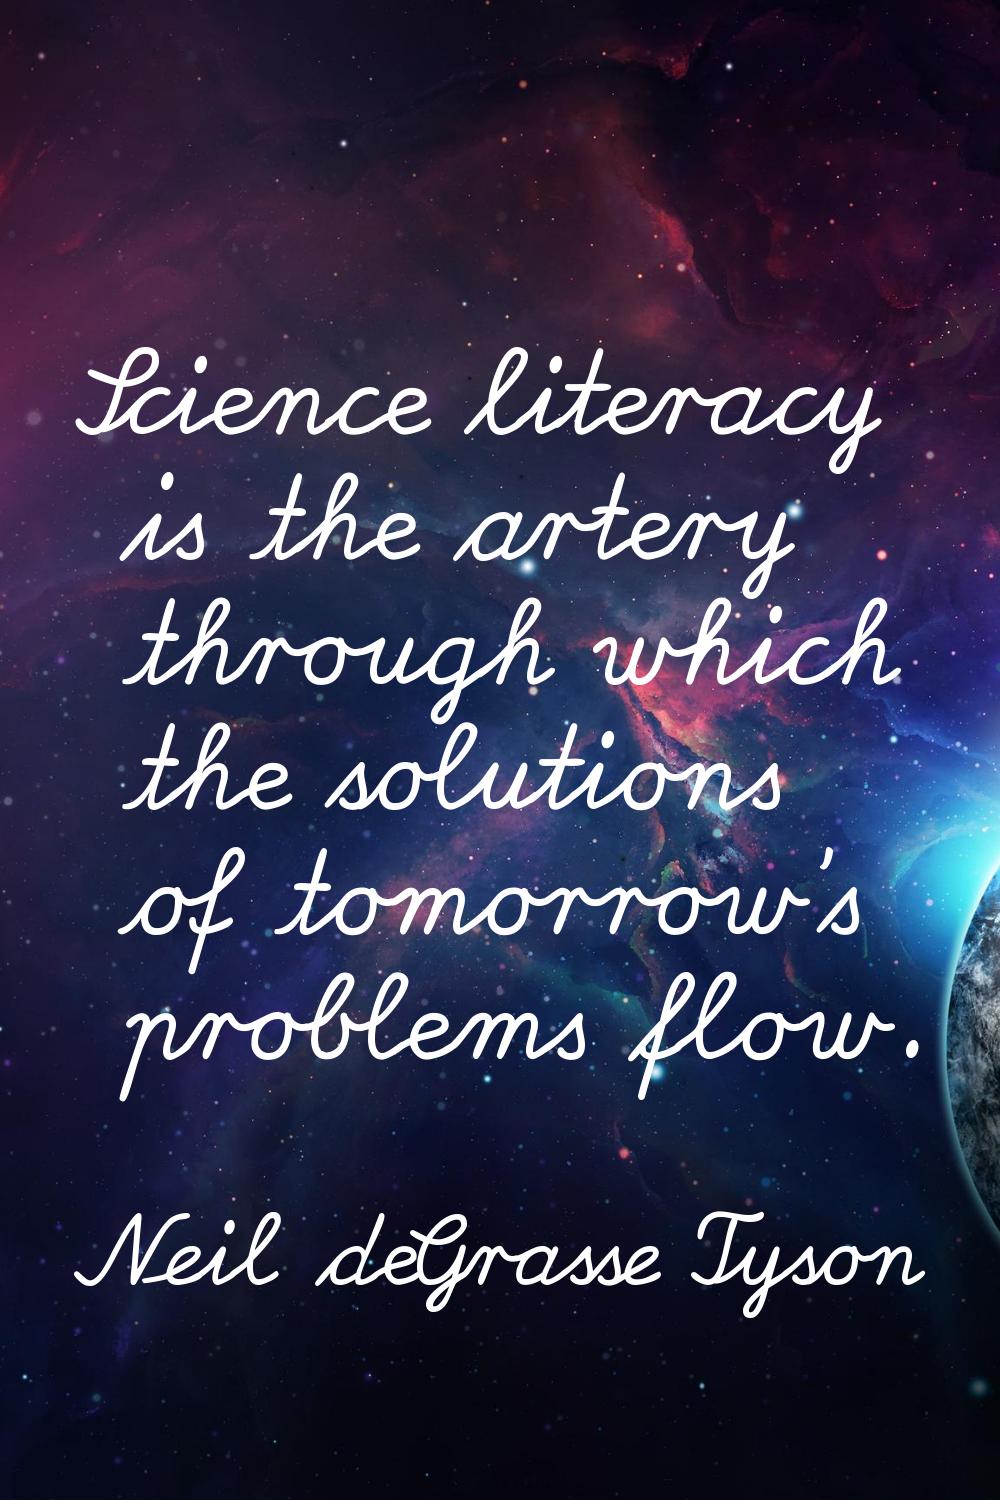 Science literacy is the artery through which the solutions of tomorrow's problems flow.